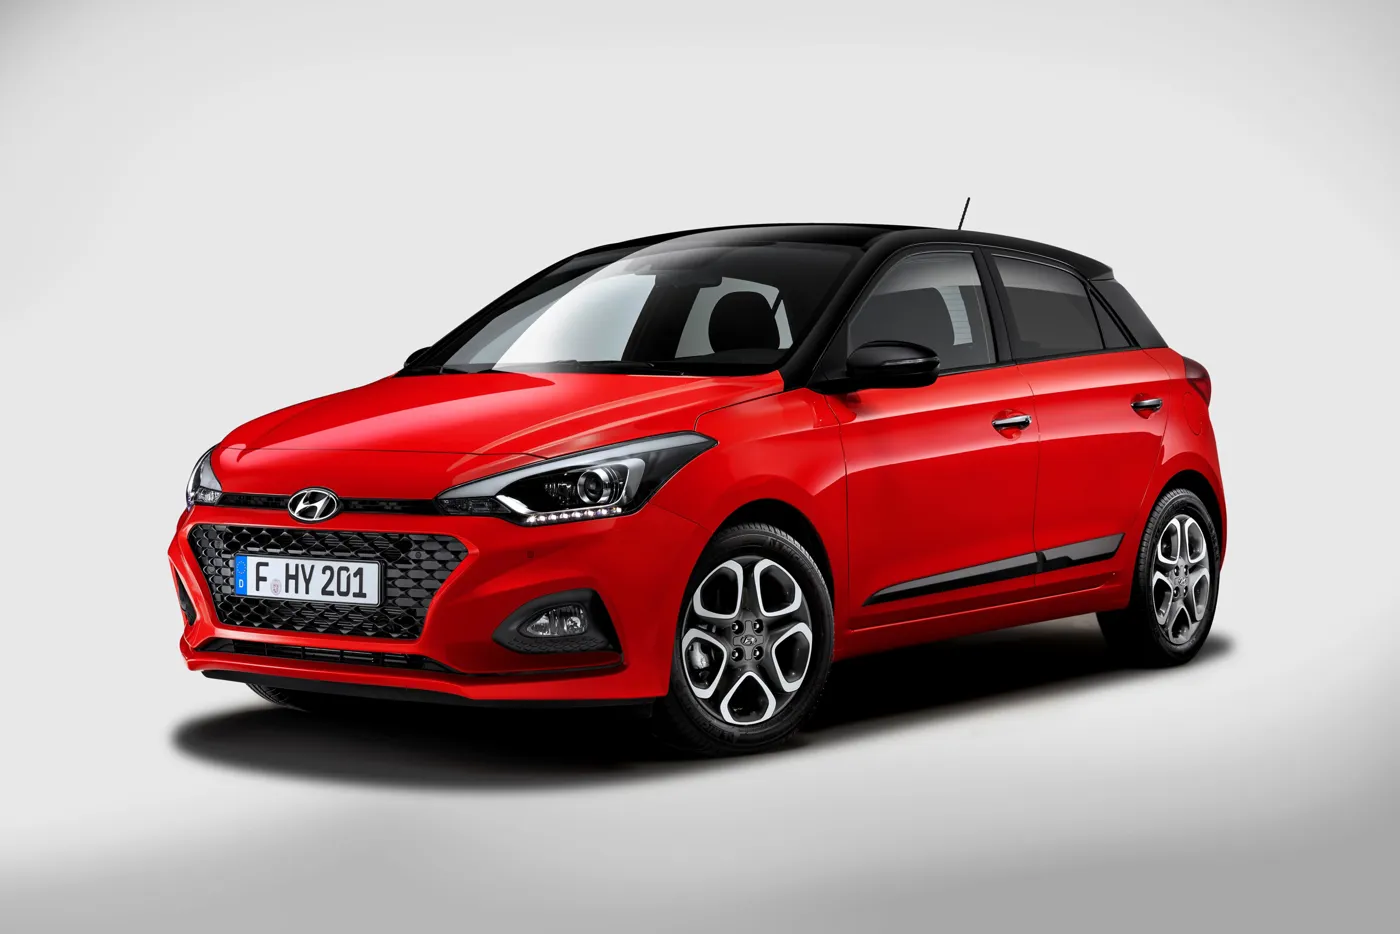 Hyundai reveals new i20 with improved safety systems